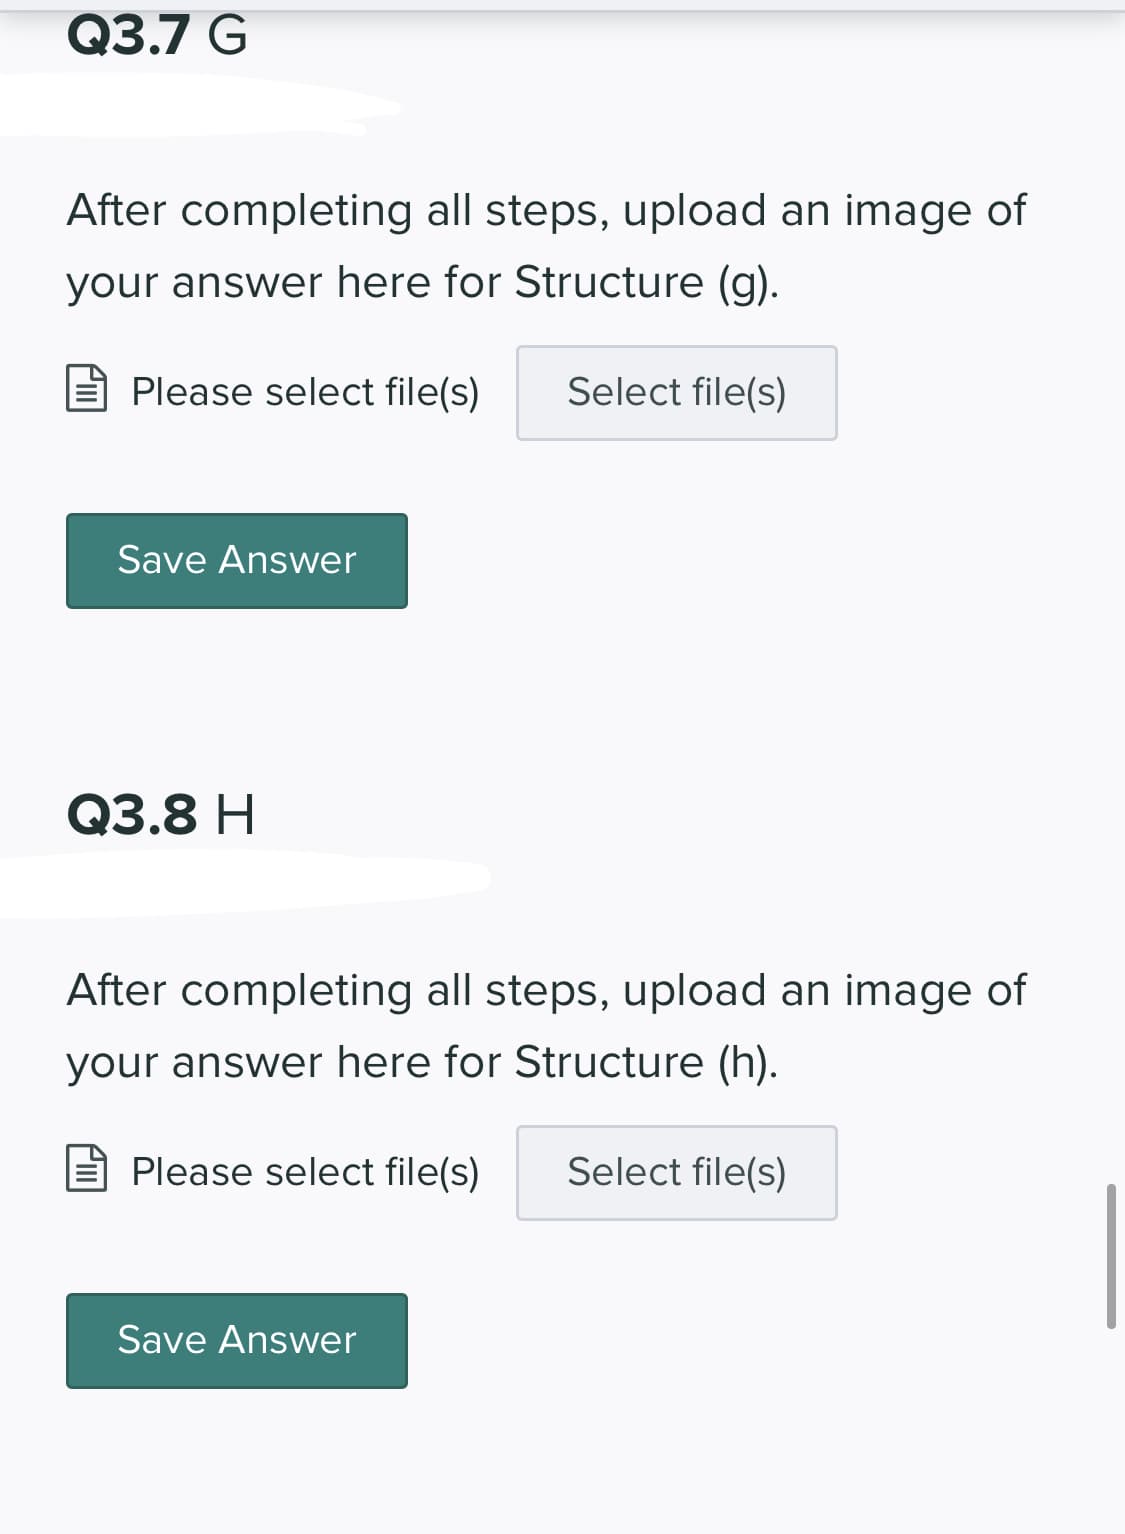 Q3.7 G
After completing all steps, upload an image of
your answer here for Structure (g).
E Please select file(s)
Select file(s)
Save Answer
Q3.8 H
After completing all steps, upload an image of
your answer here for Structure (h).
Please select file(s)
Select file(s)
Save Answer
